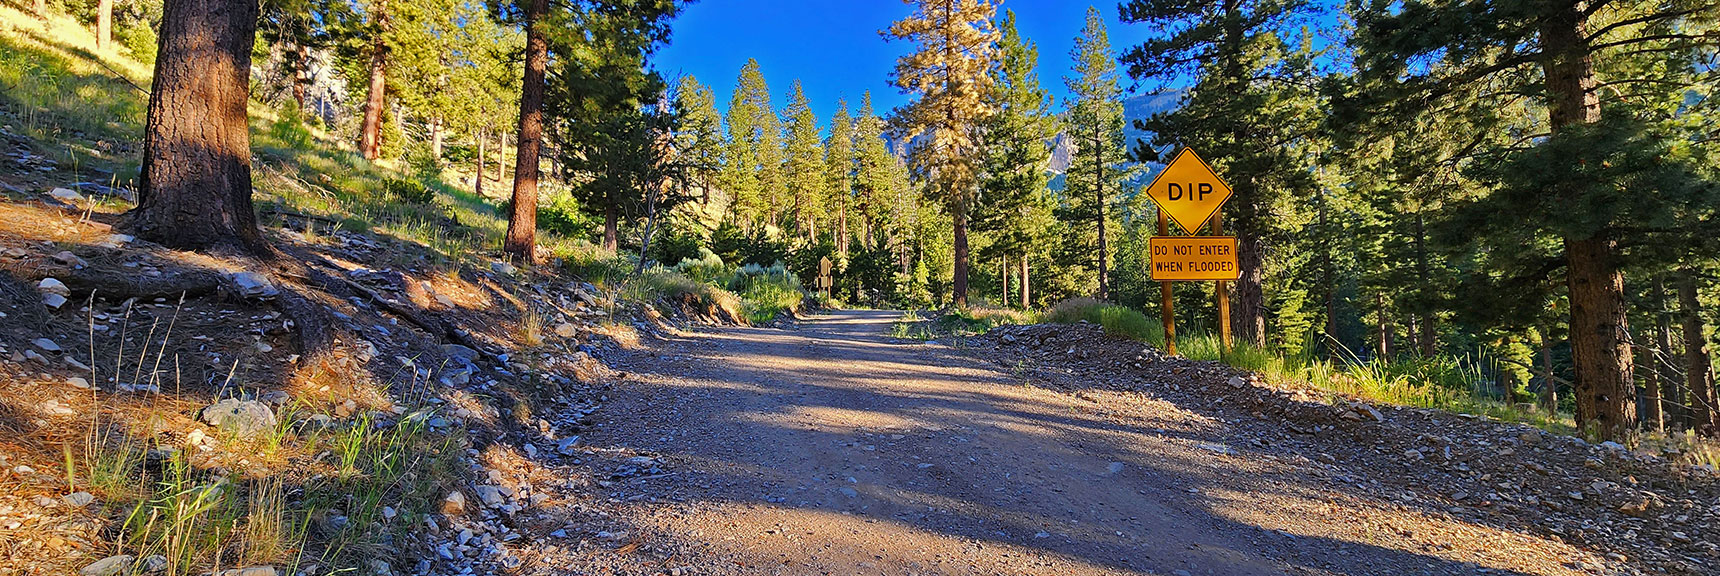 Prior Image: Small "Dip" Sign Beyond Large Sign Was Reference Point for Rainbow Ridge Rd. | Harris Mountain Triangle | Mt Charleston Wilderness, Nevada